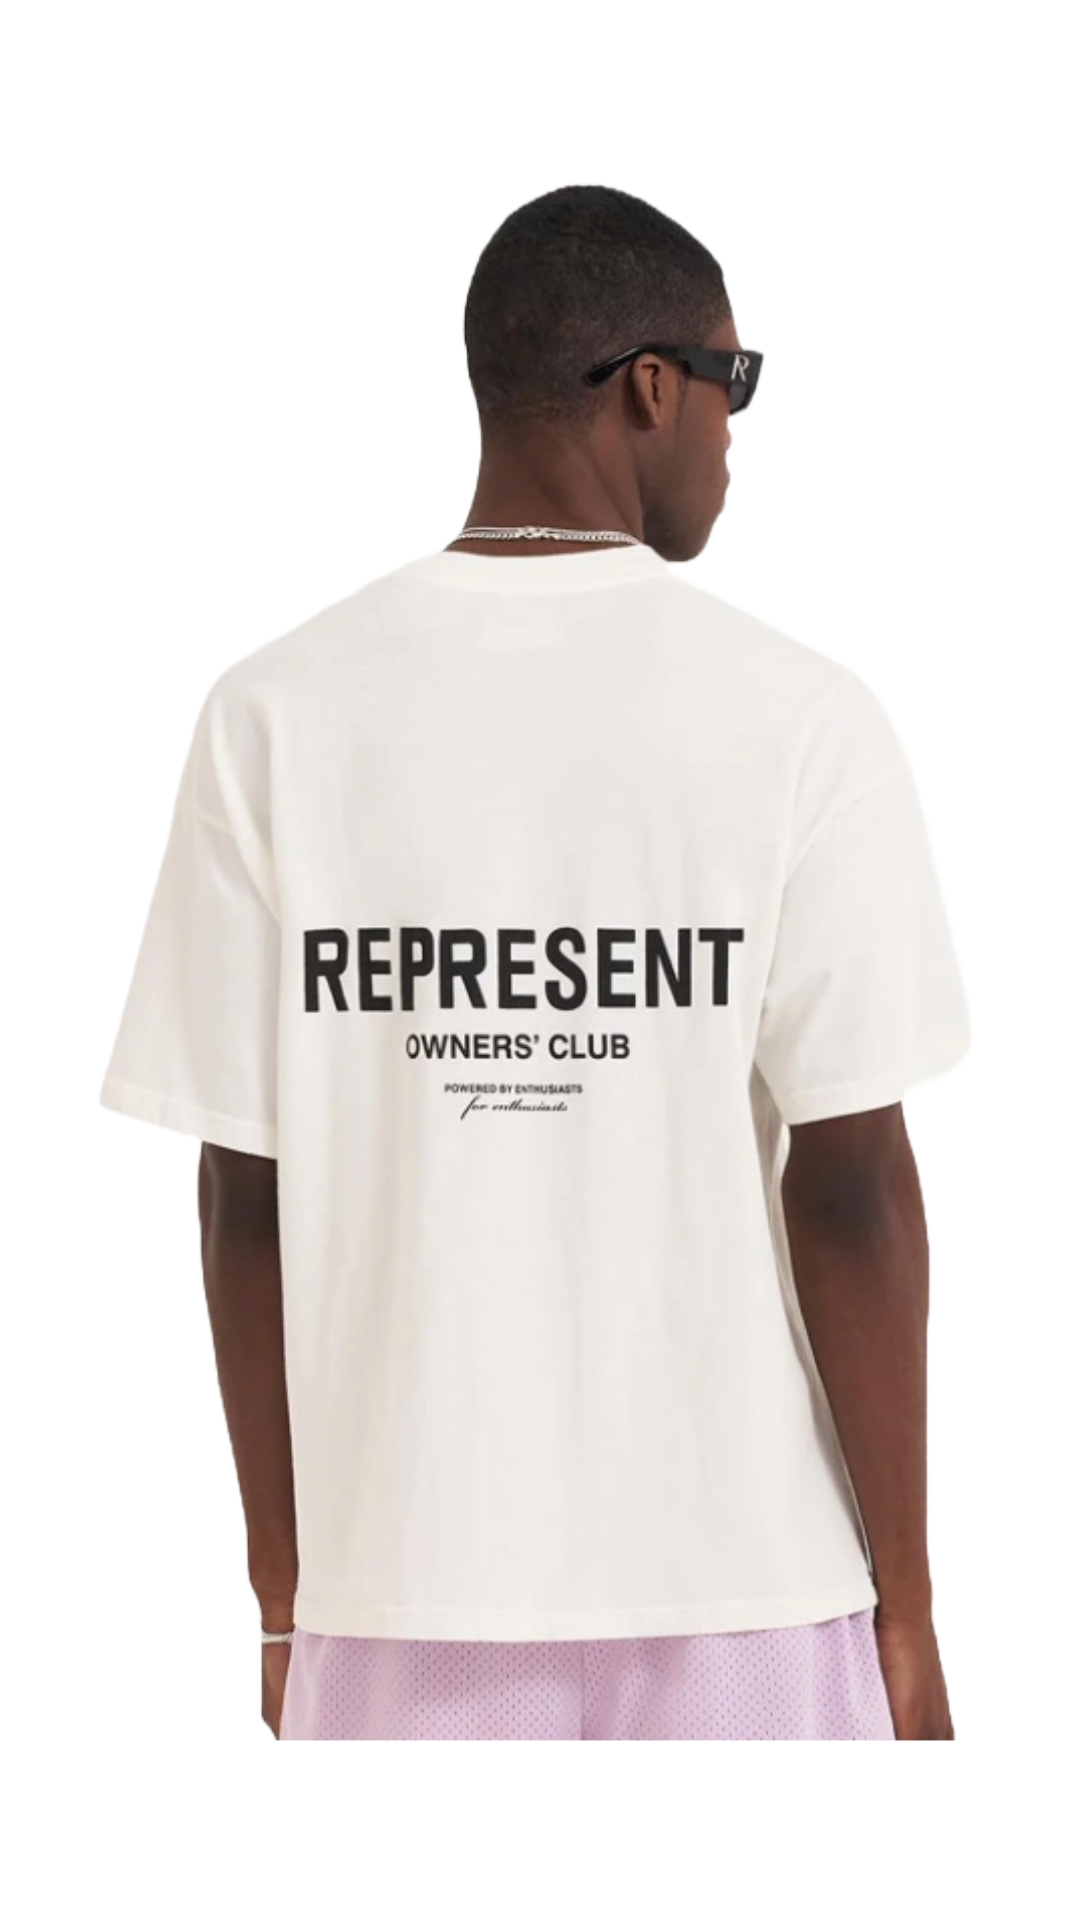 REPRESENT OWNERS CLUB T-SHIRT - FLAT WHITE